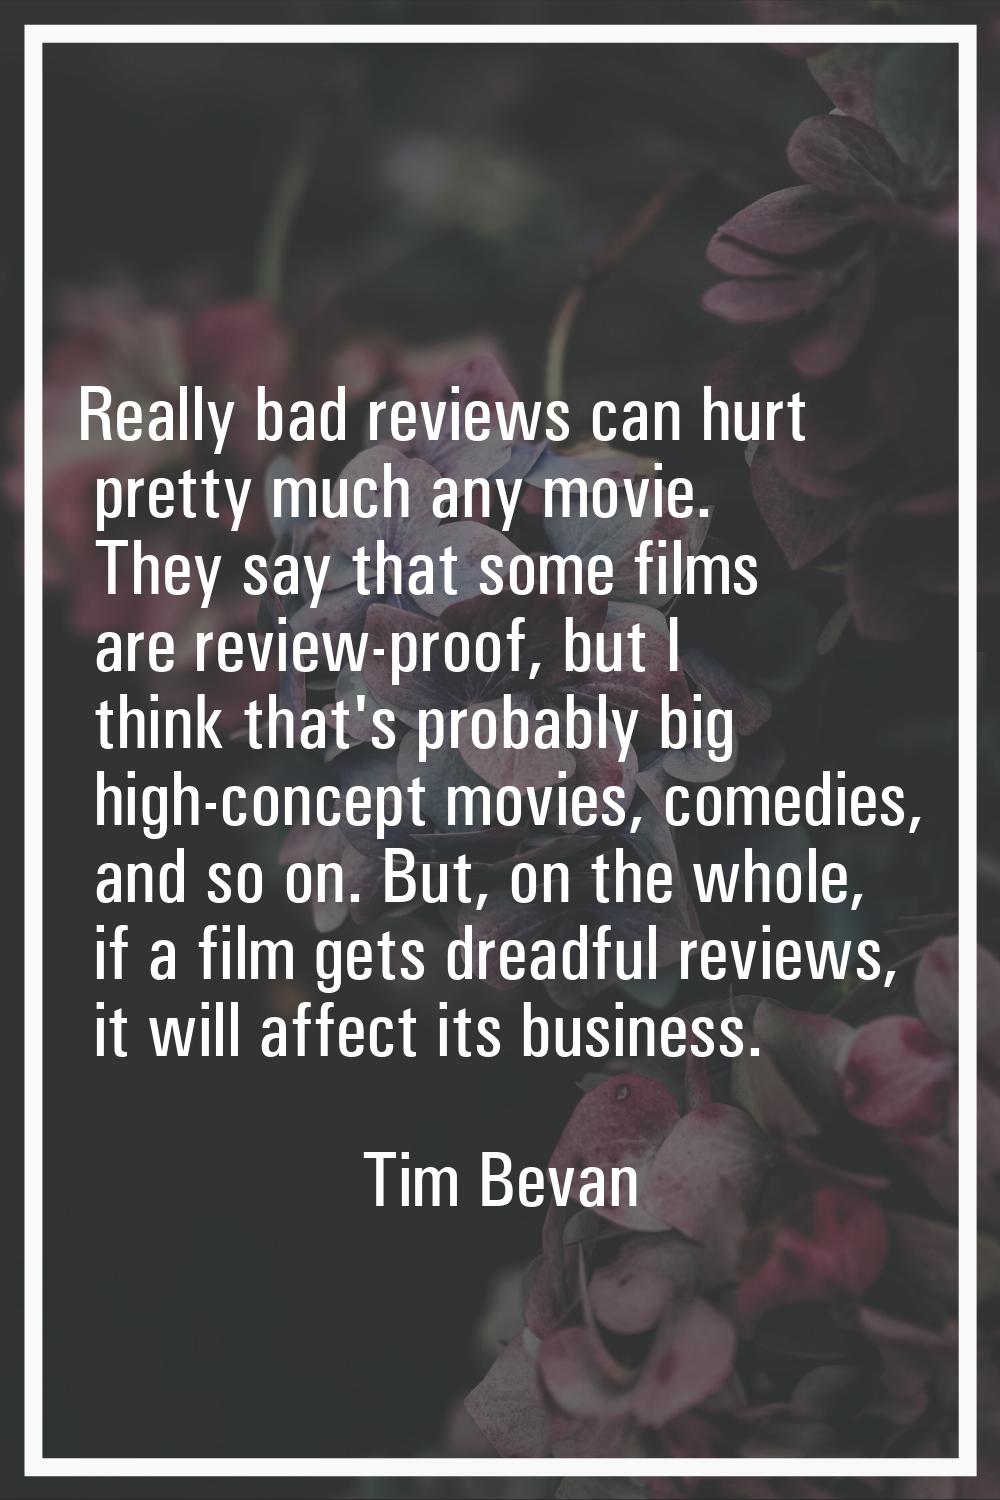 Really bad reviews can hurt pretty much any movie. They say that some films are review-proof, but I